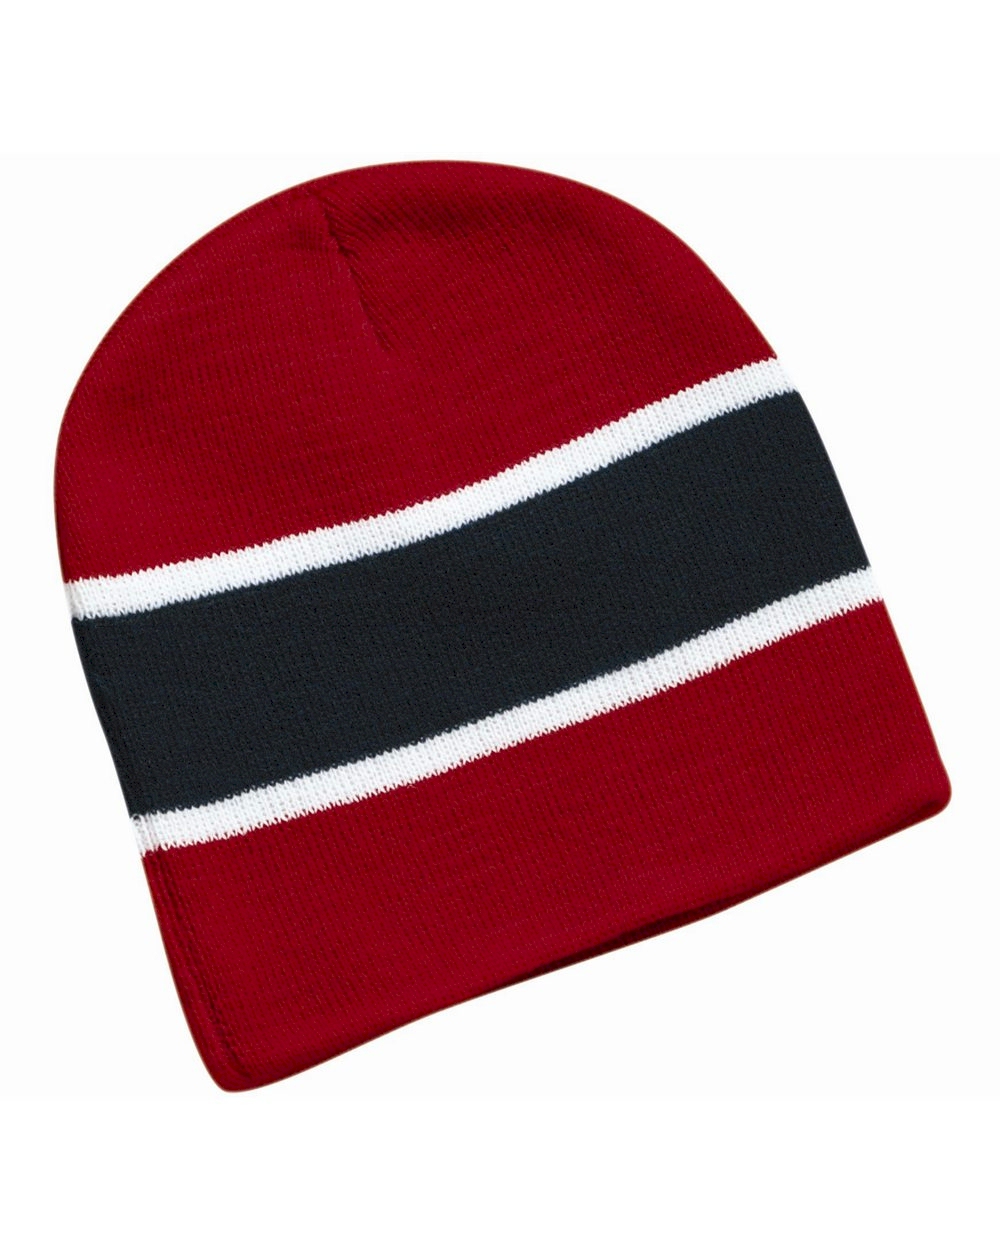 Striped Knit Beanie Embroidery Blanks - Red/White/Black